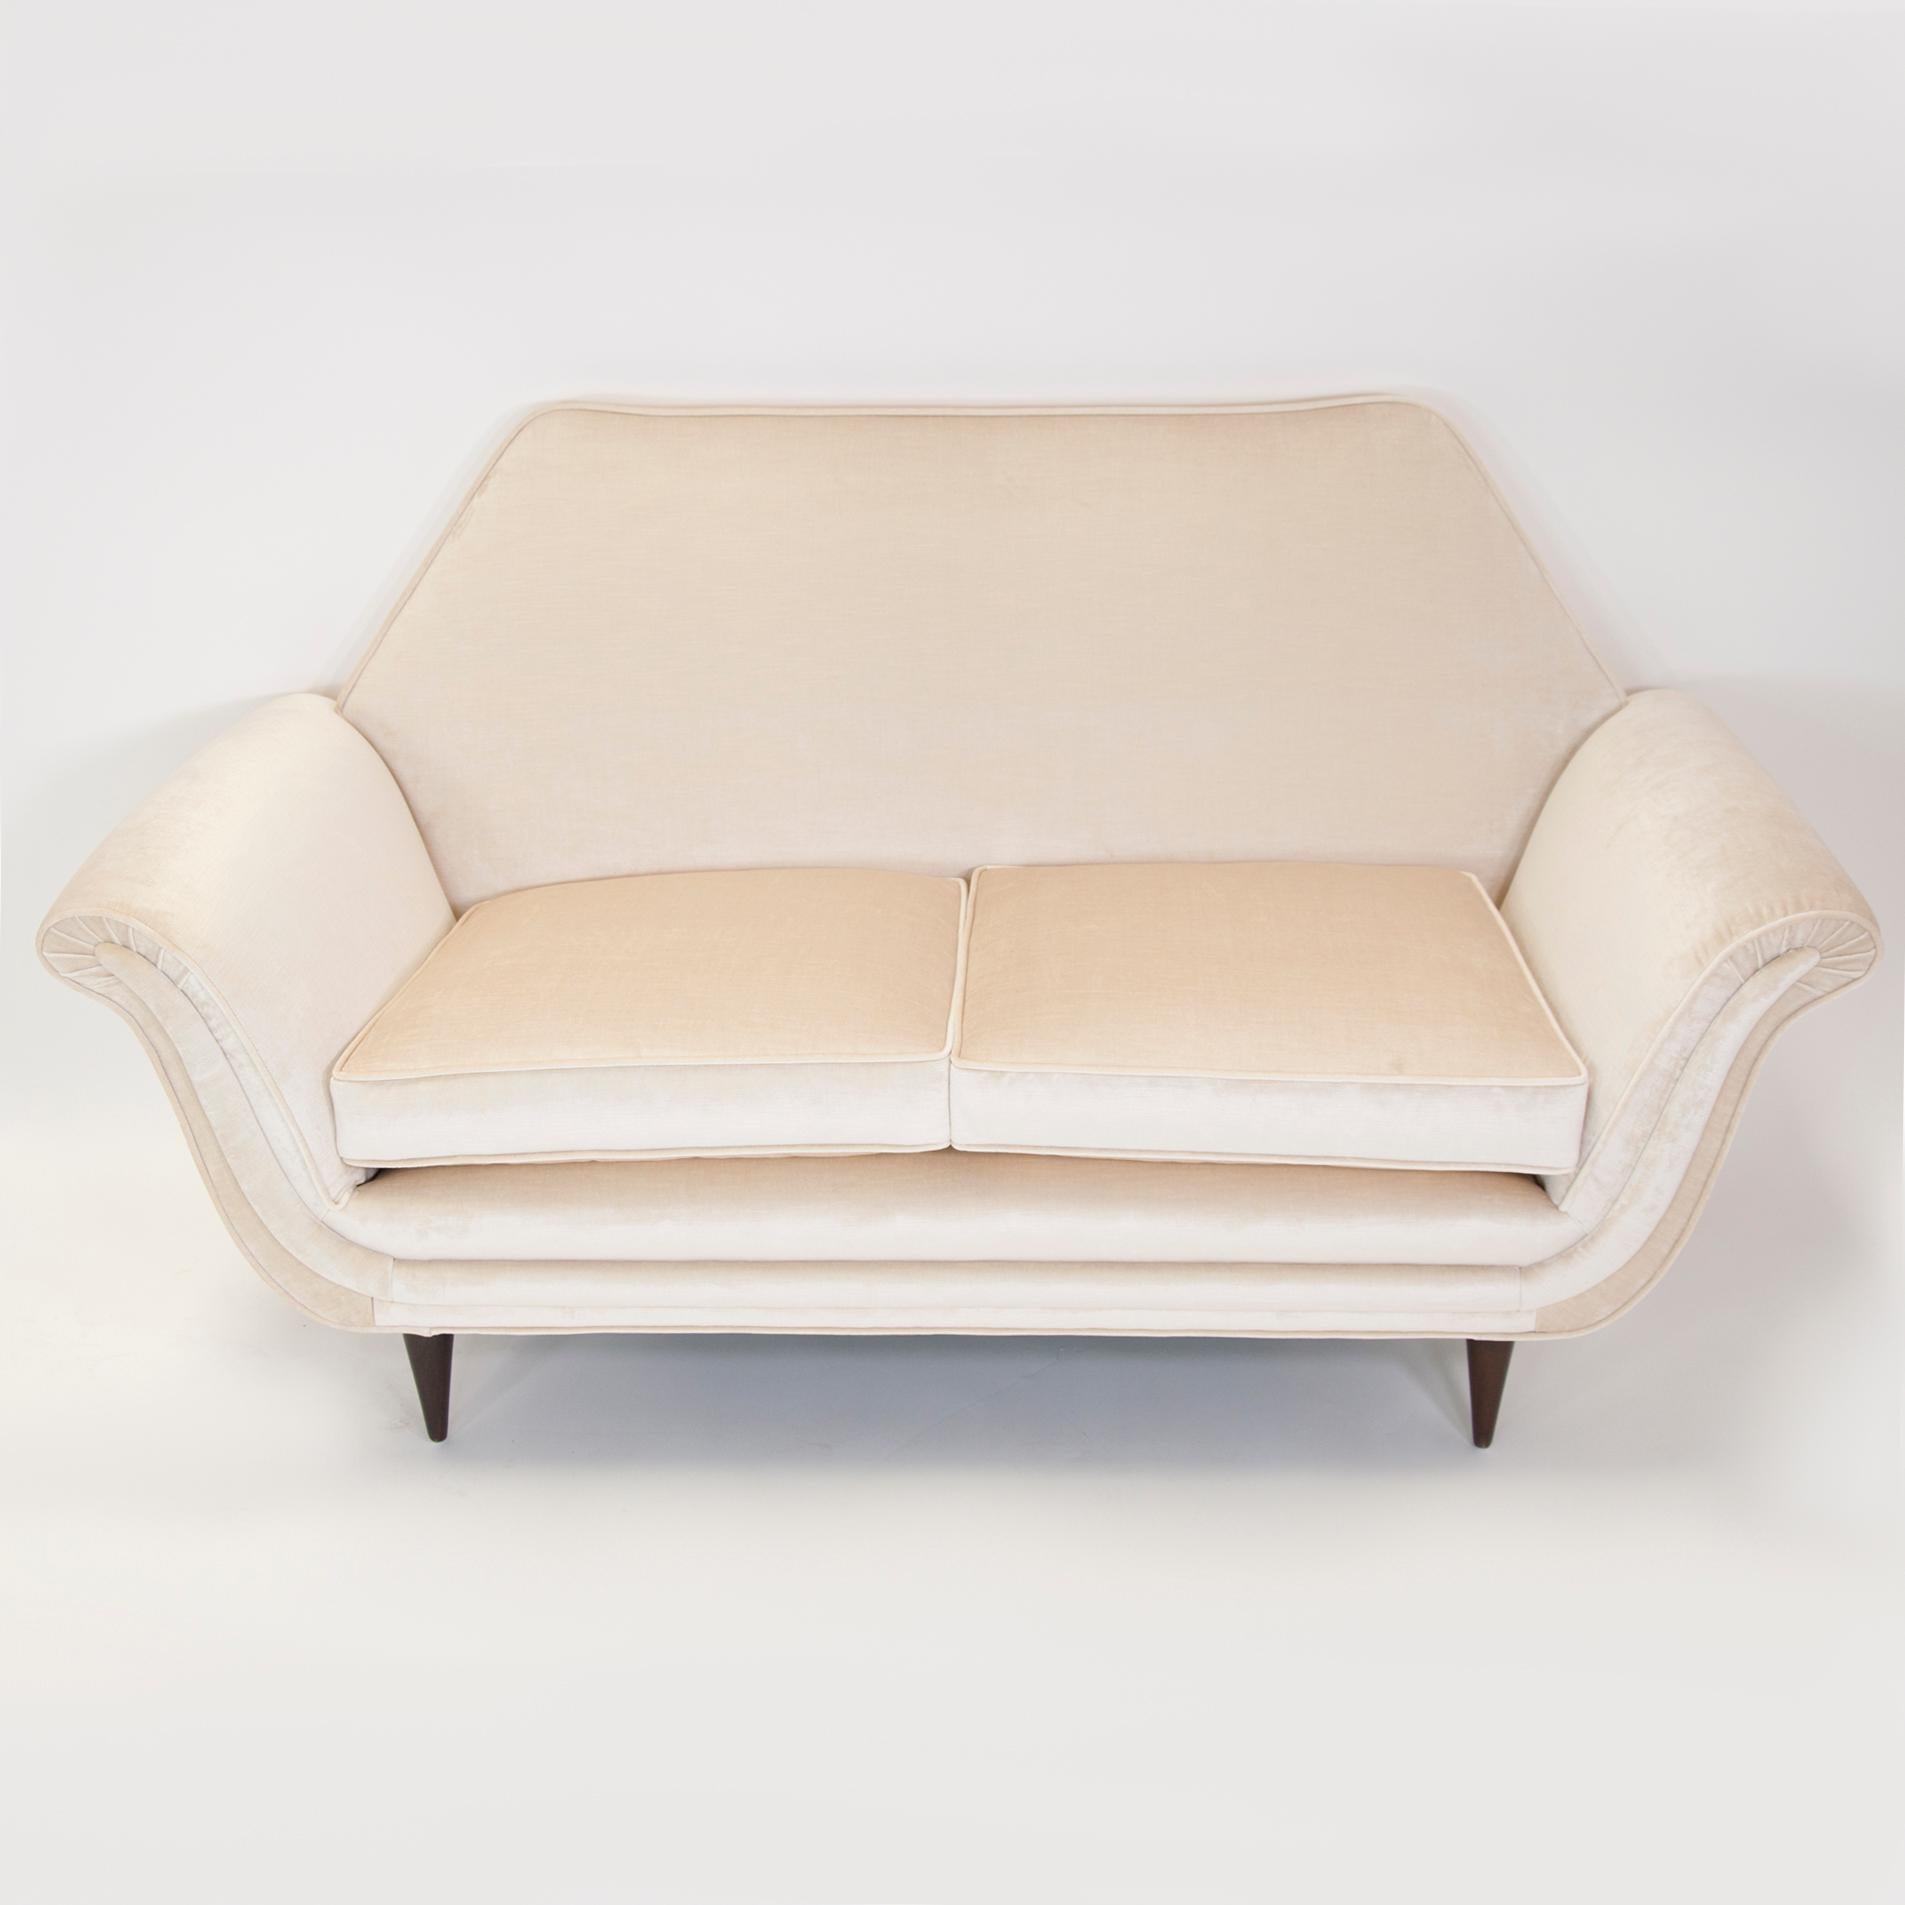 Sculptural Mid-Century Modern Italian love seat in the manner of Guglielmo Ulrich. Restored and reupholstered in an ivory velvet.

Measures: Seat 18 H x 44 W x 20 D
Arm height 23